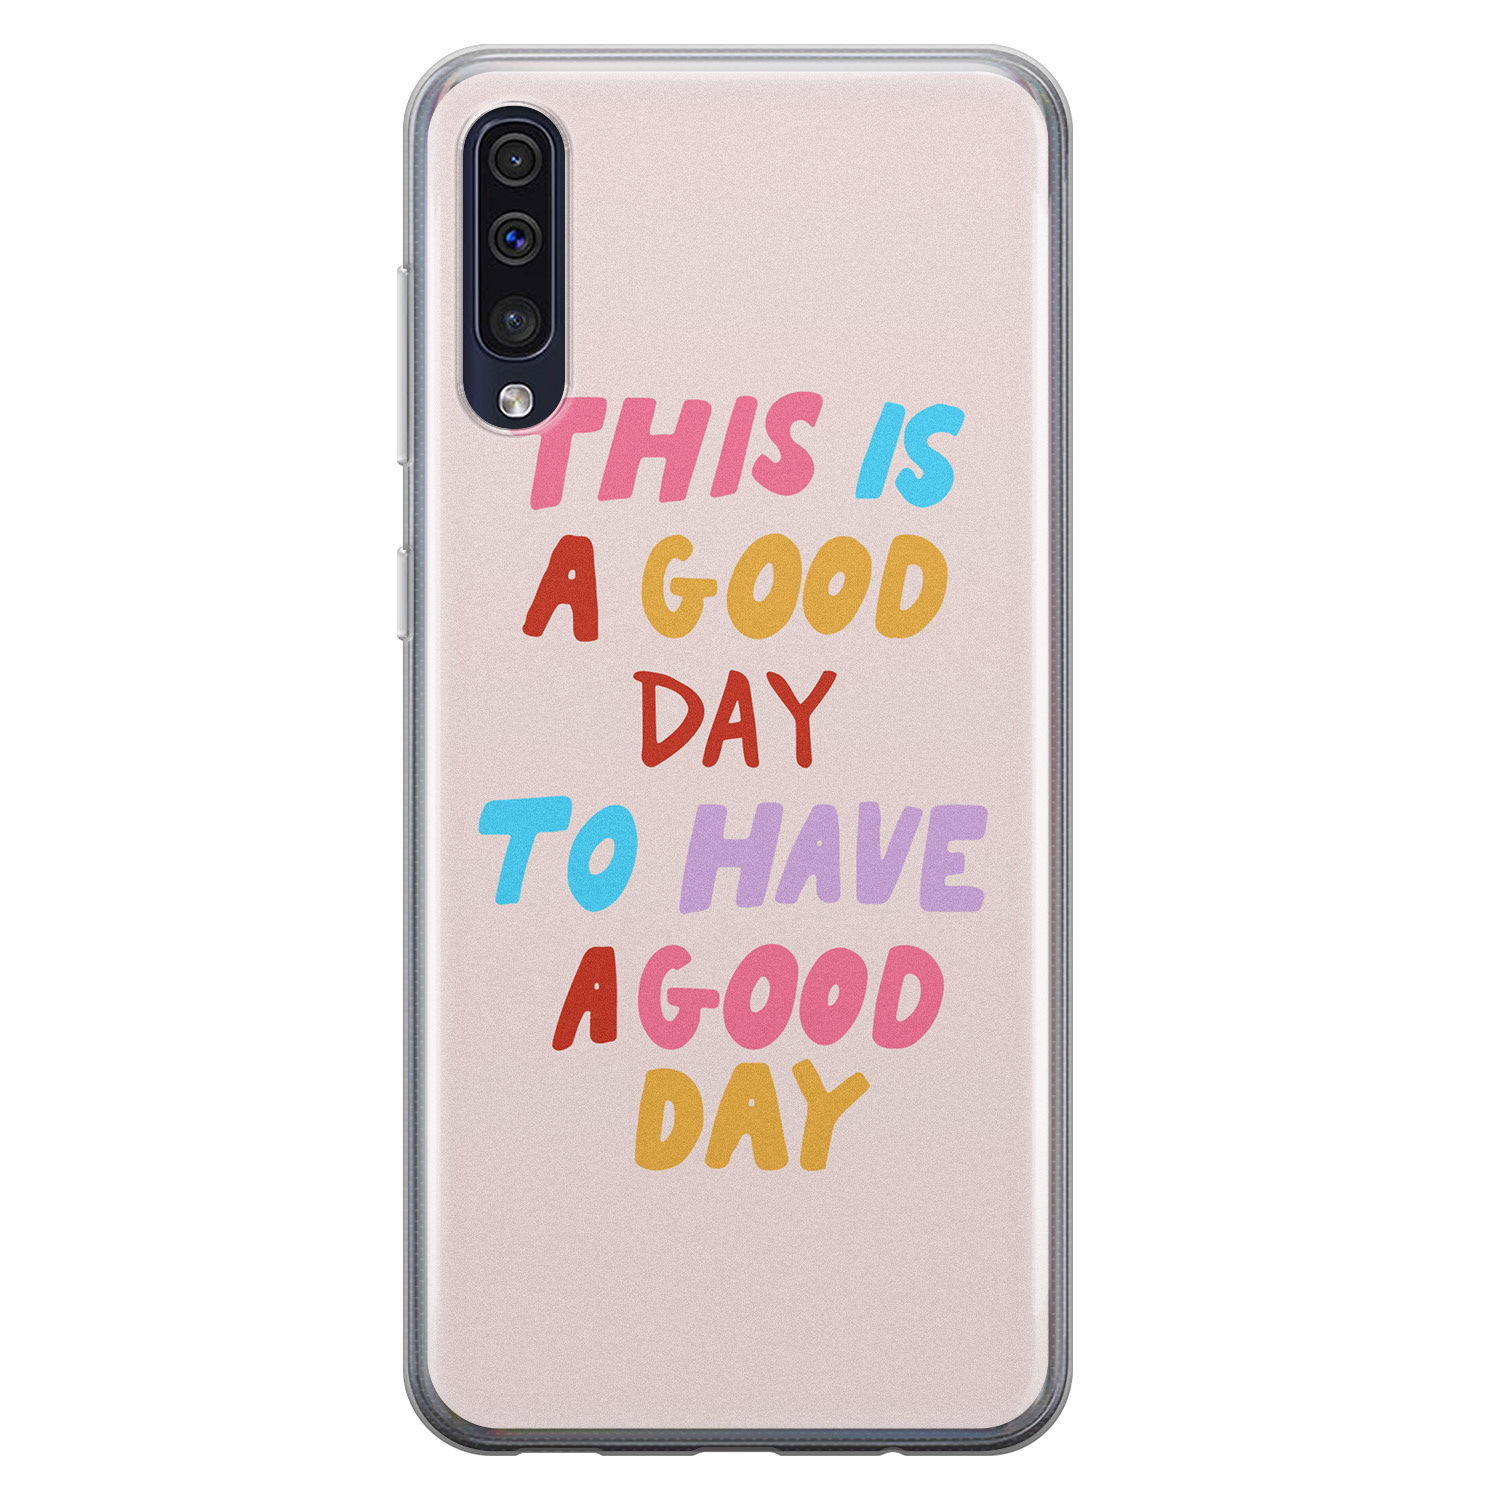 Leuke Telefoonhoesjes Samsung Galaxy A50/A30s siliconen hoesje - This is a good day